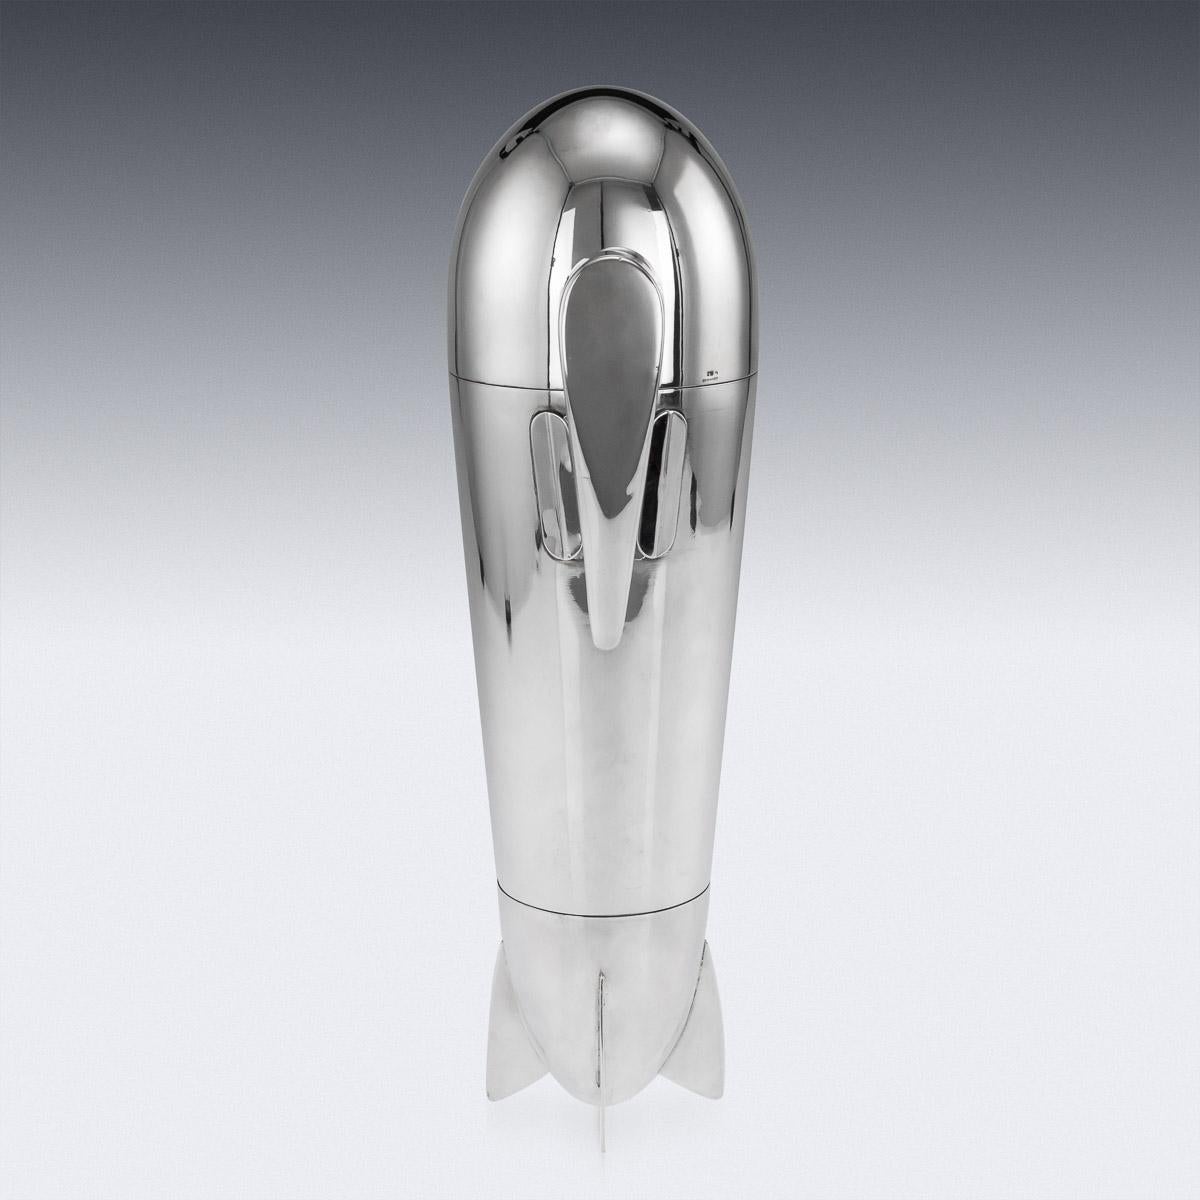 German 20th Century Art Deco Silver Plated Zeppelin Cocktail Shaker, c.1930